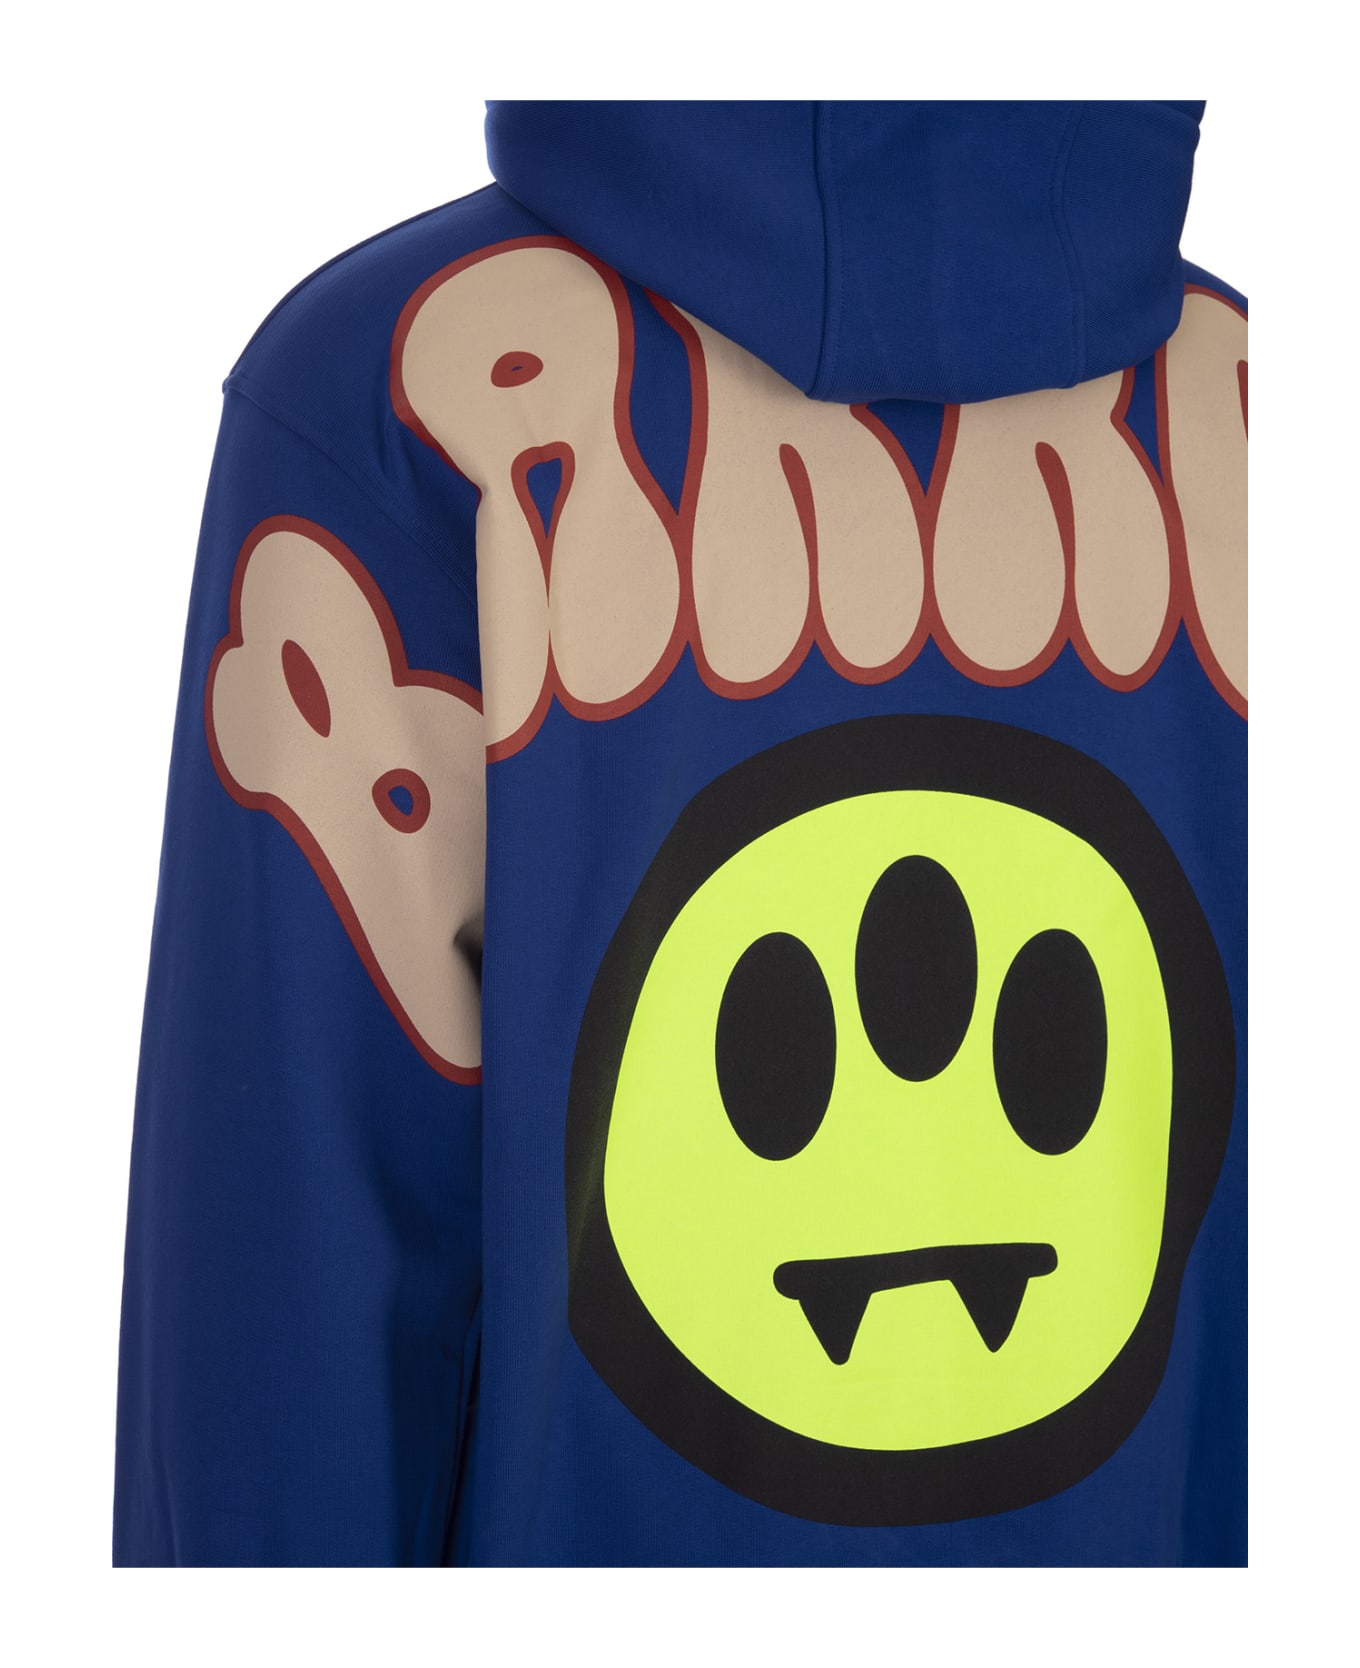 Barrow Blue Hoodie With Front And Back Lettering Logo - Dazzling Blue